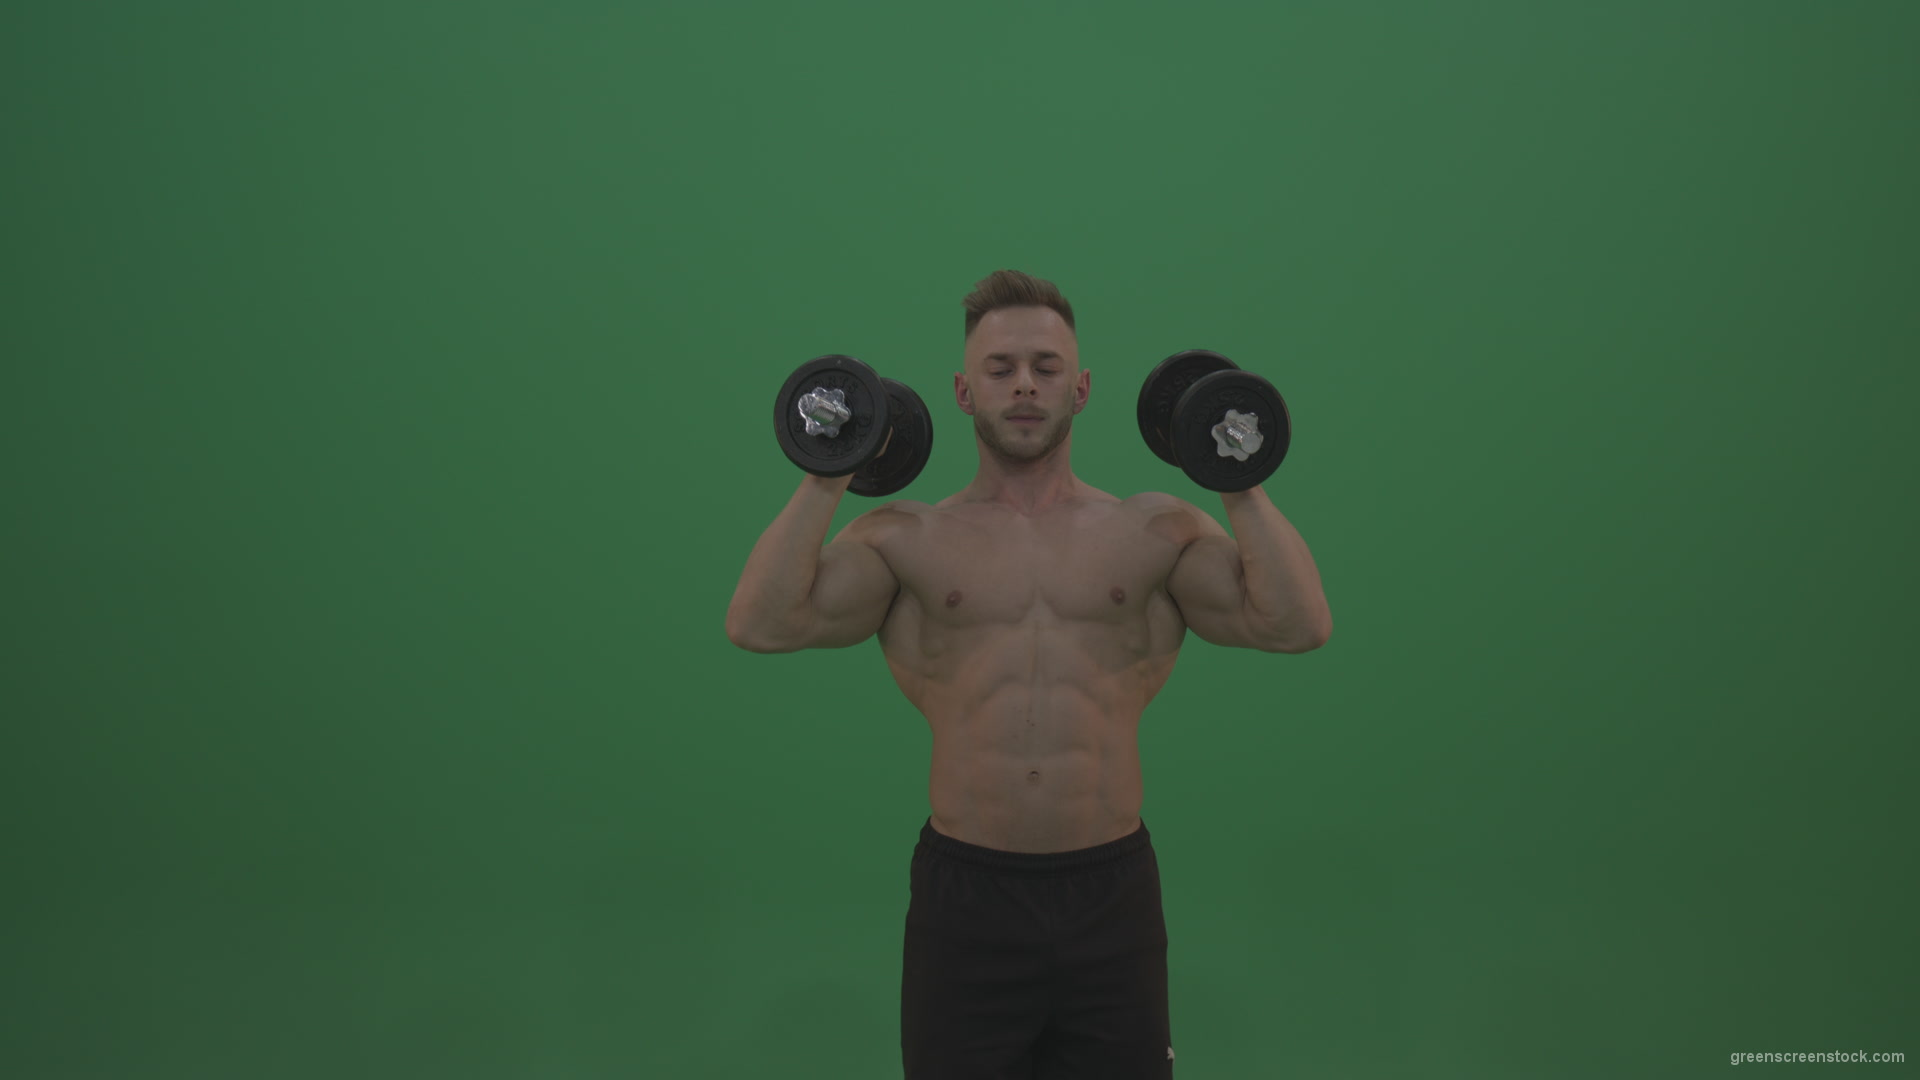 Young_Athlete_Doing_Two_Handed_Excercises_Workout_With_Dumbbells_For_Triceps_And_Pectoral_Muscles_On_Green_Screen_Wall_Background_007 Green Screen Stock